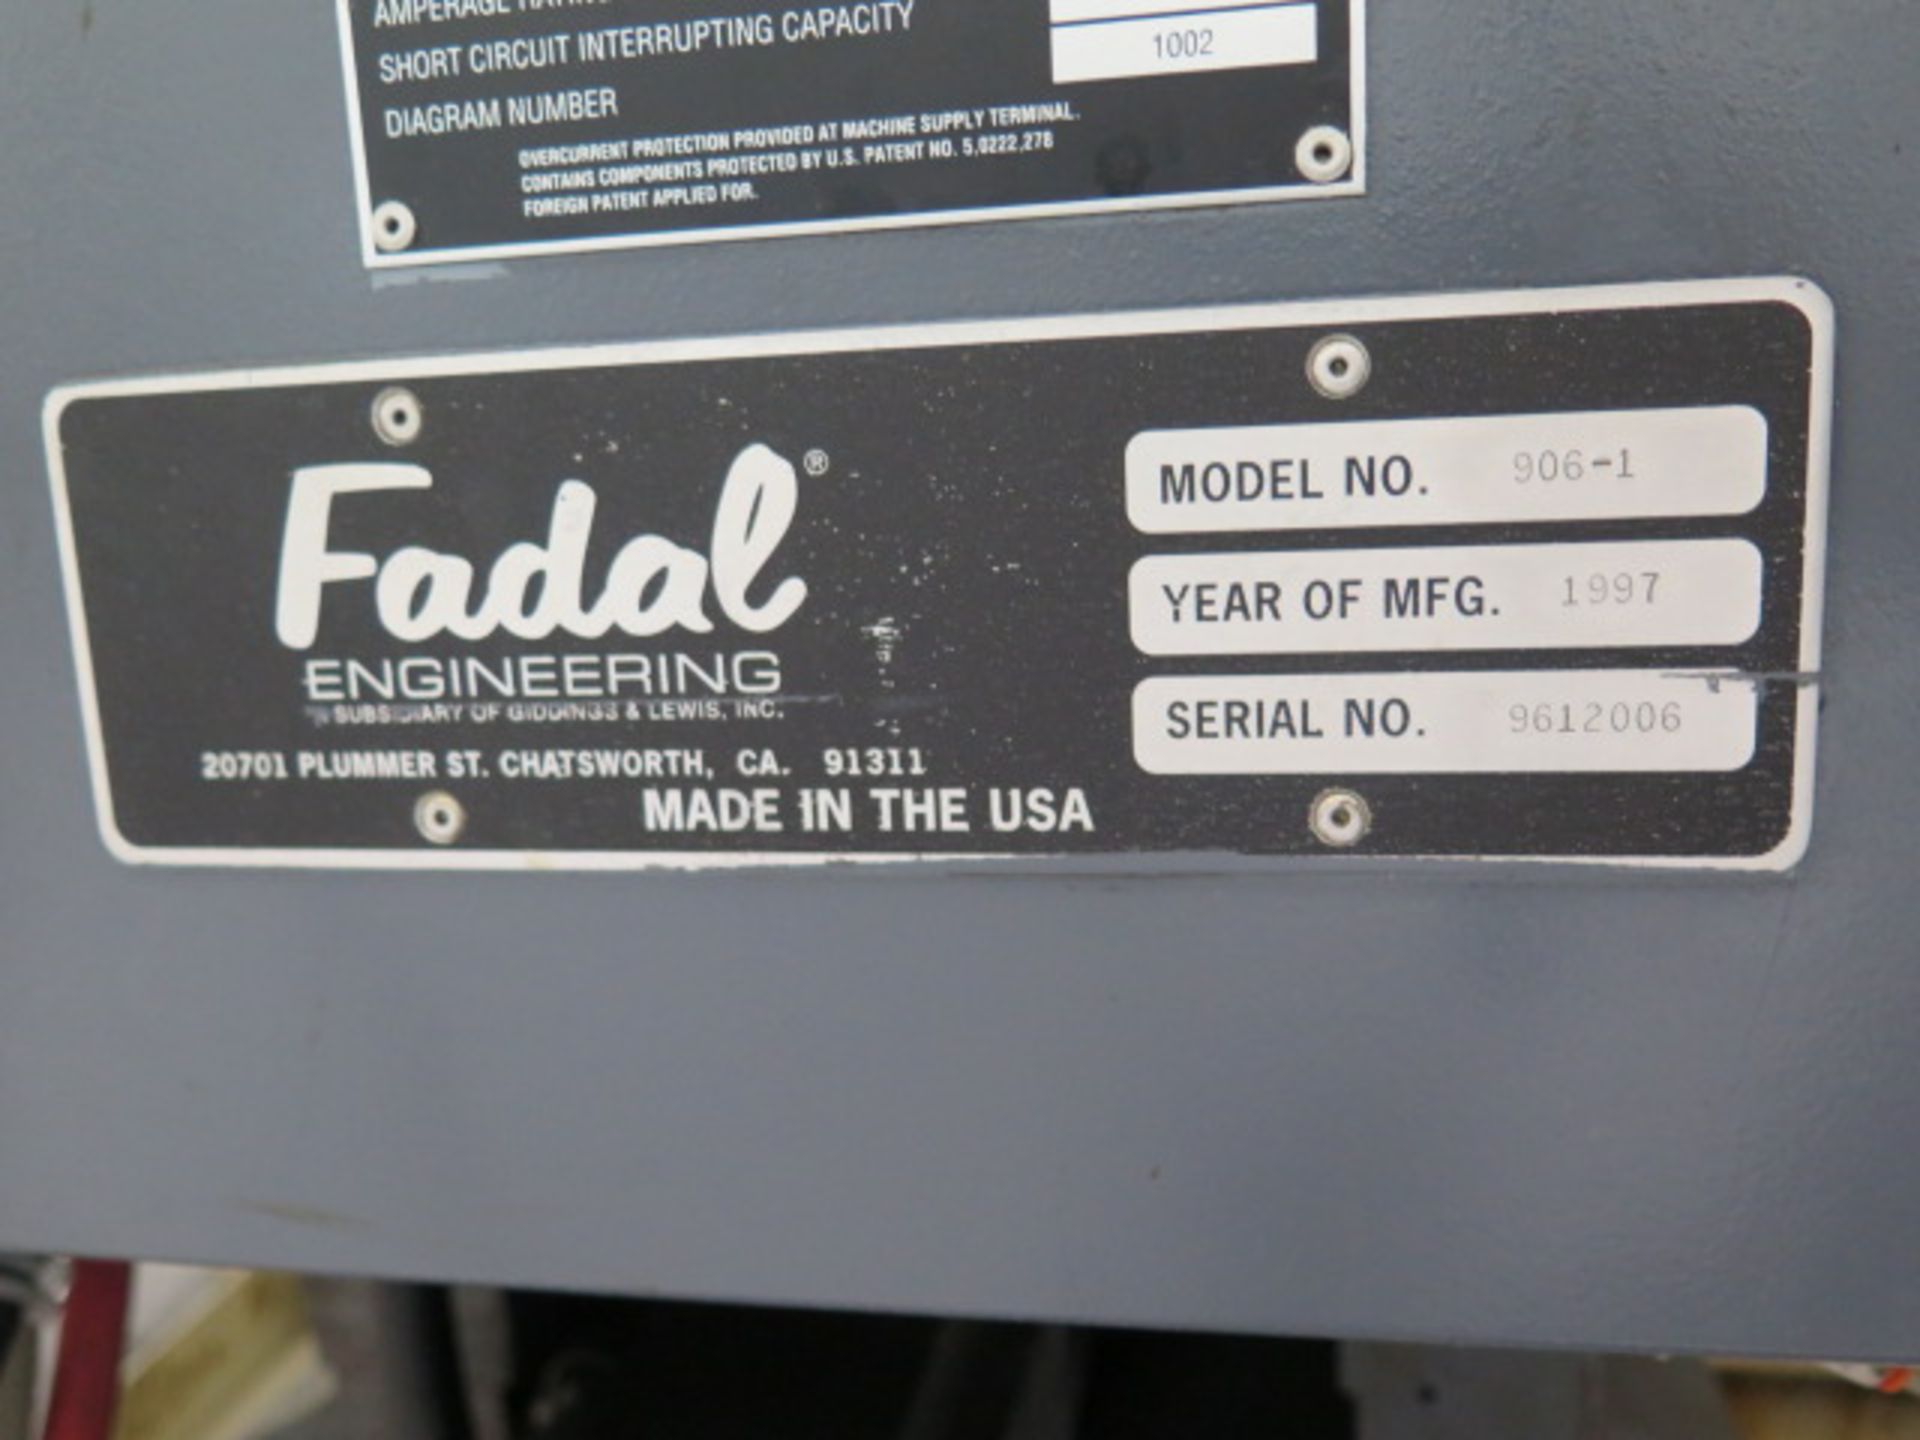 1997 Fadal VMC4020 4-Axis CNC VMC s/n 9612006 w/ Fadal Multi Processor CNC, SOLD AS IS - Image 14 of 14